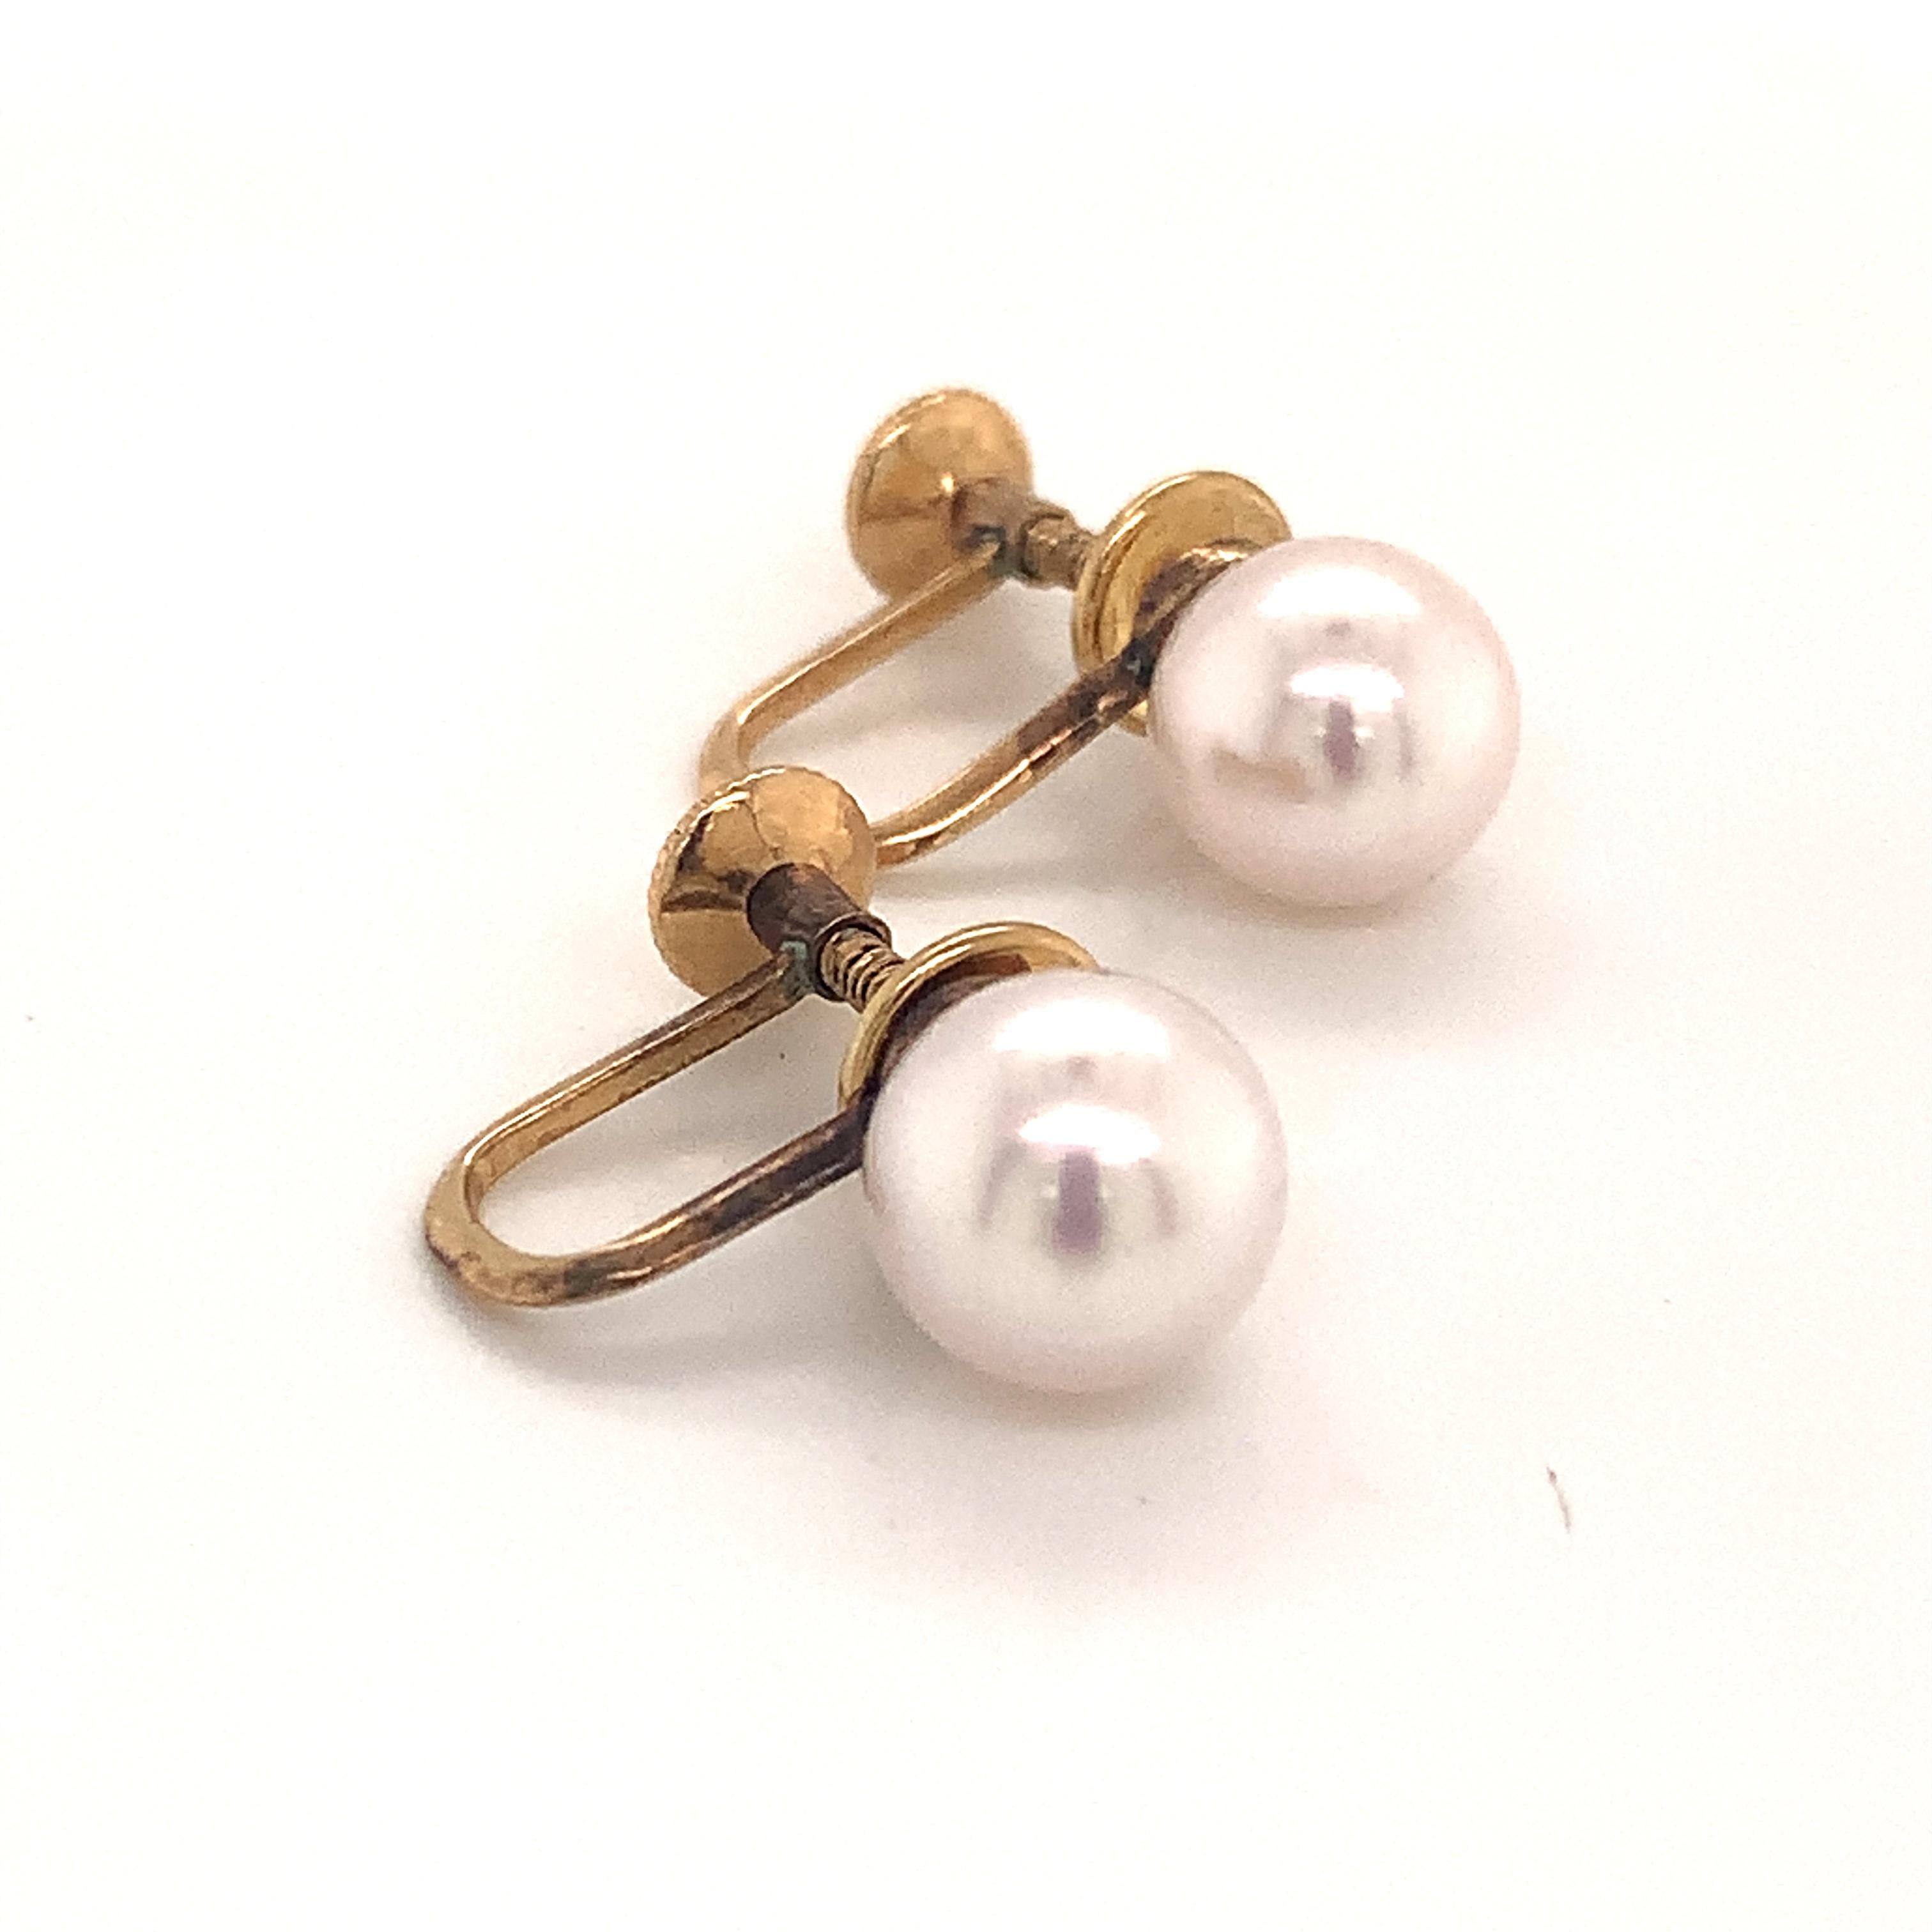 Mikimoto Estate Akoya Pearl Earrings 14k Gold 8 mm 3.7 Grams M206

These elegant Authentic Mikimoto Estate Akoya pearl clip-on earrings are made of 14 karats yellow gold and have 2 Akoya Cultured Pearls in size of 8 mm with a weight of 3.7